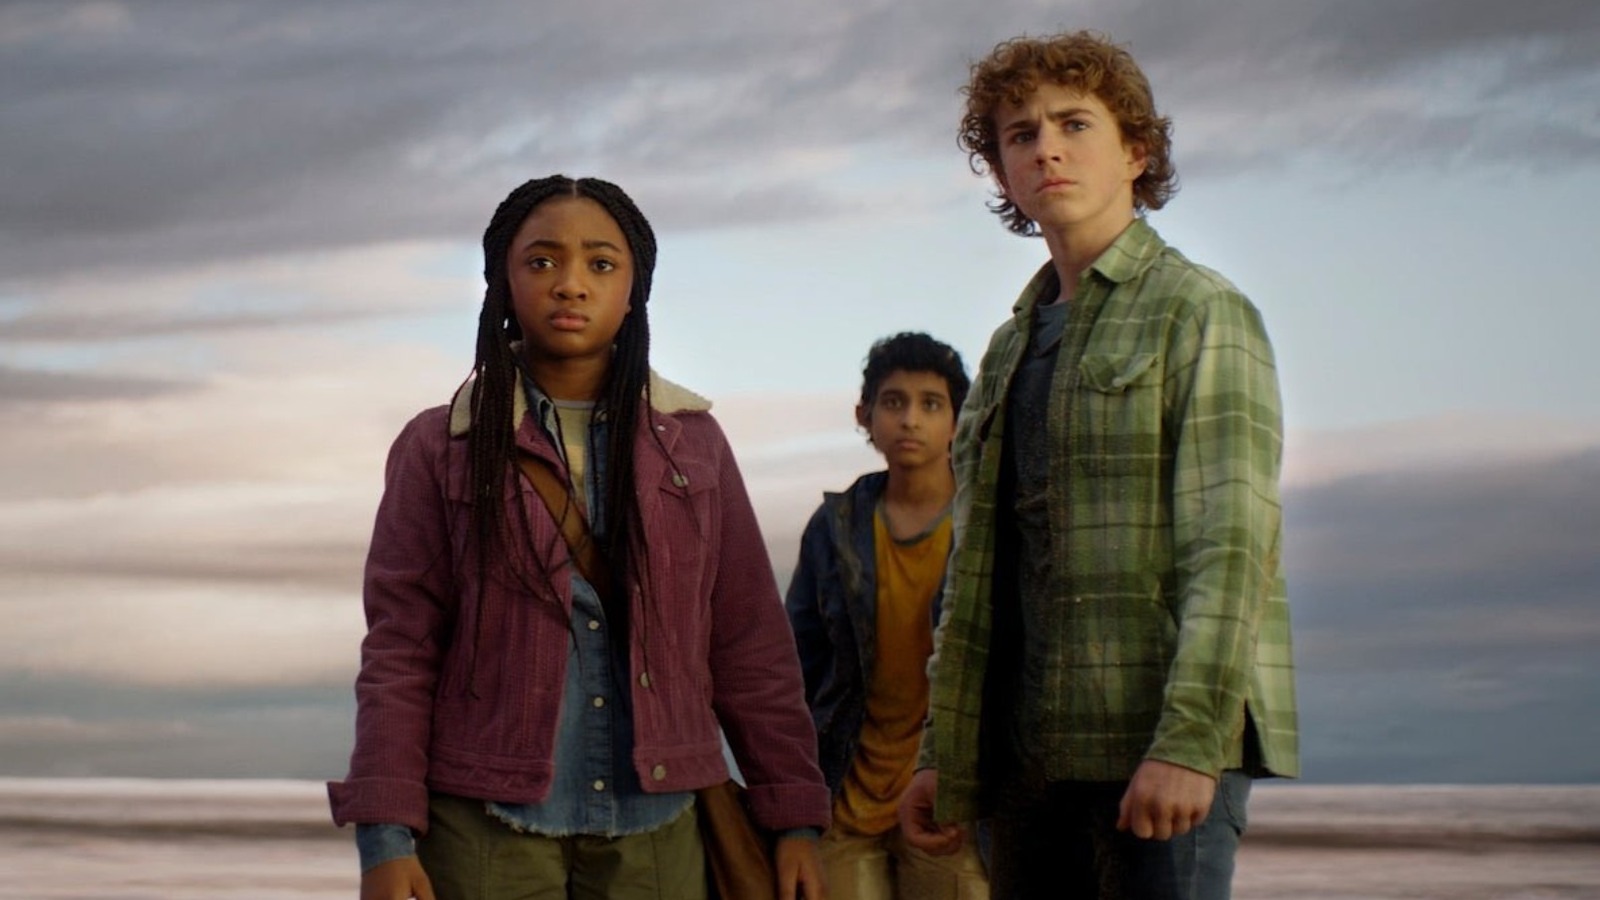 Percy Jackson And The Olympians Teaser Finally Reveals The Disney+ Series Premiere Date